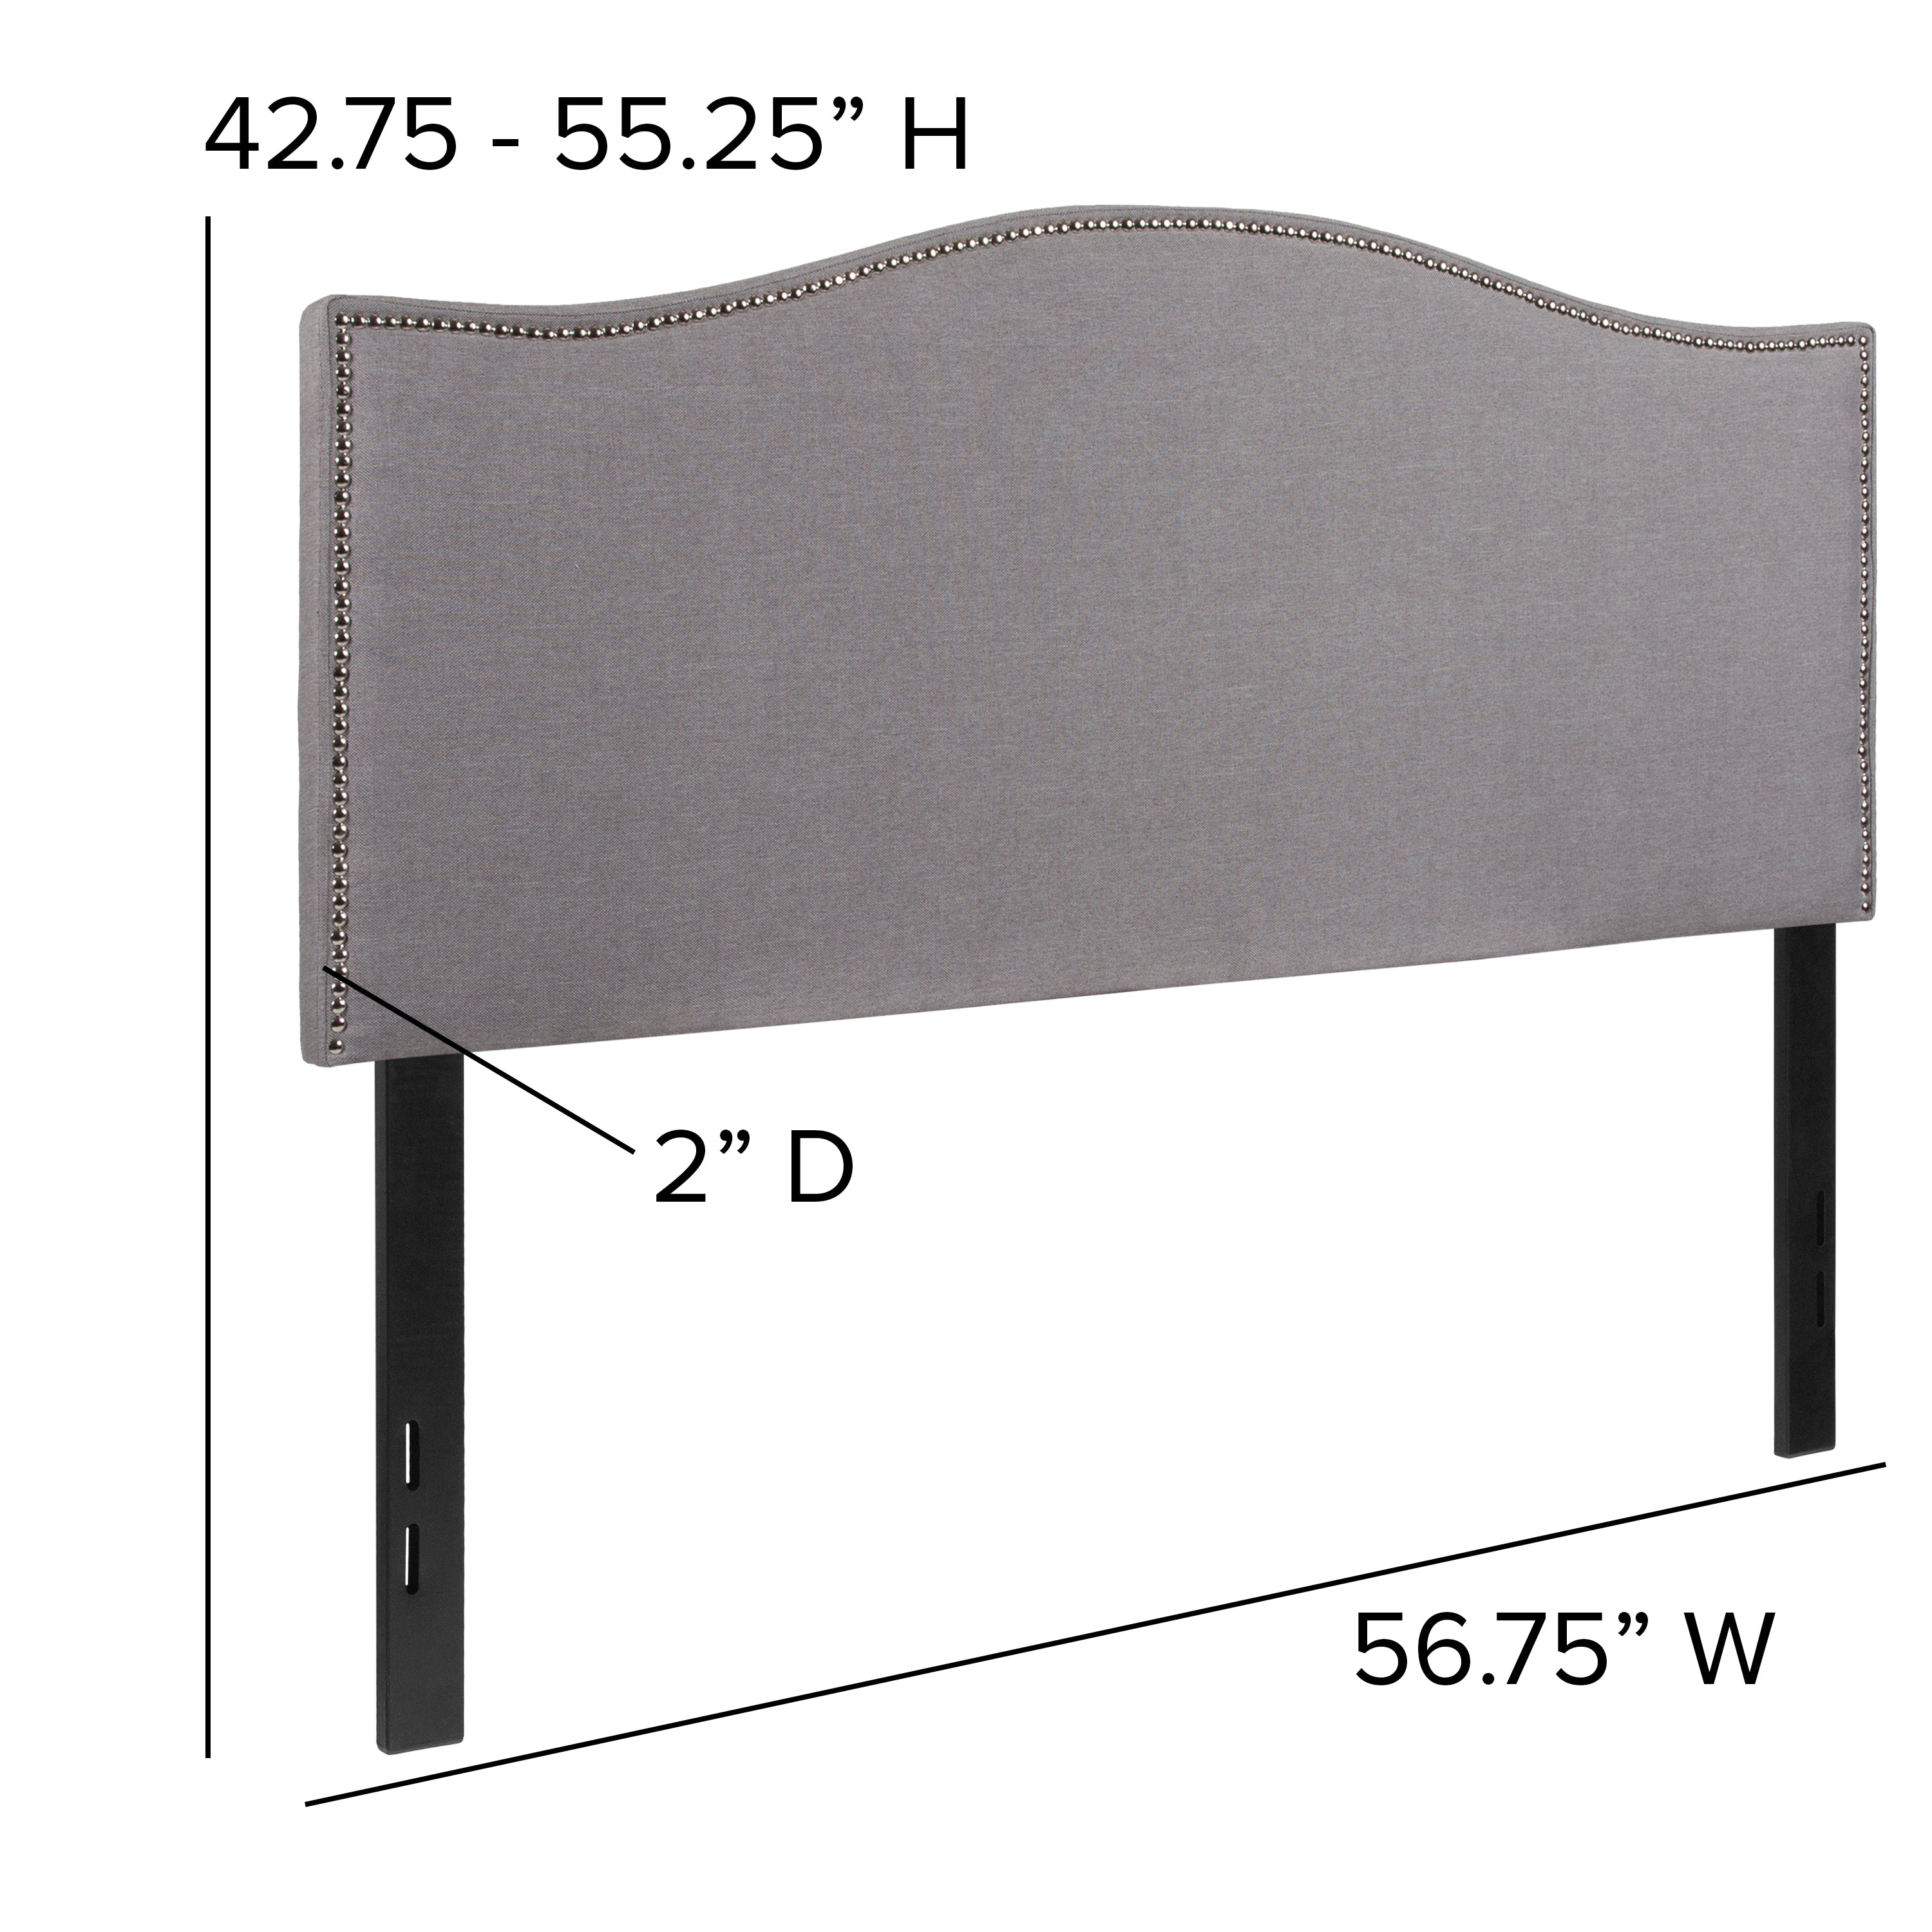 Lexington Arched Upholstered Headboard with Accent Nail Trim-Headboard-Flash Furniture-Wall2Wall Furnishings